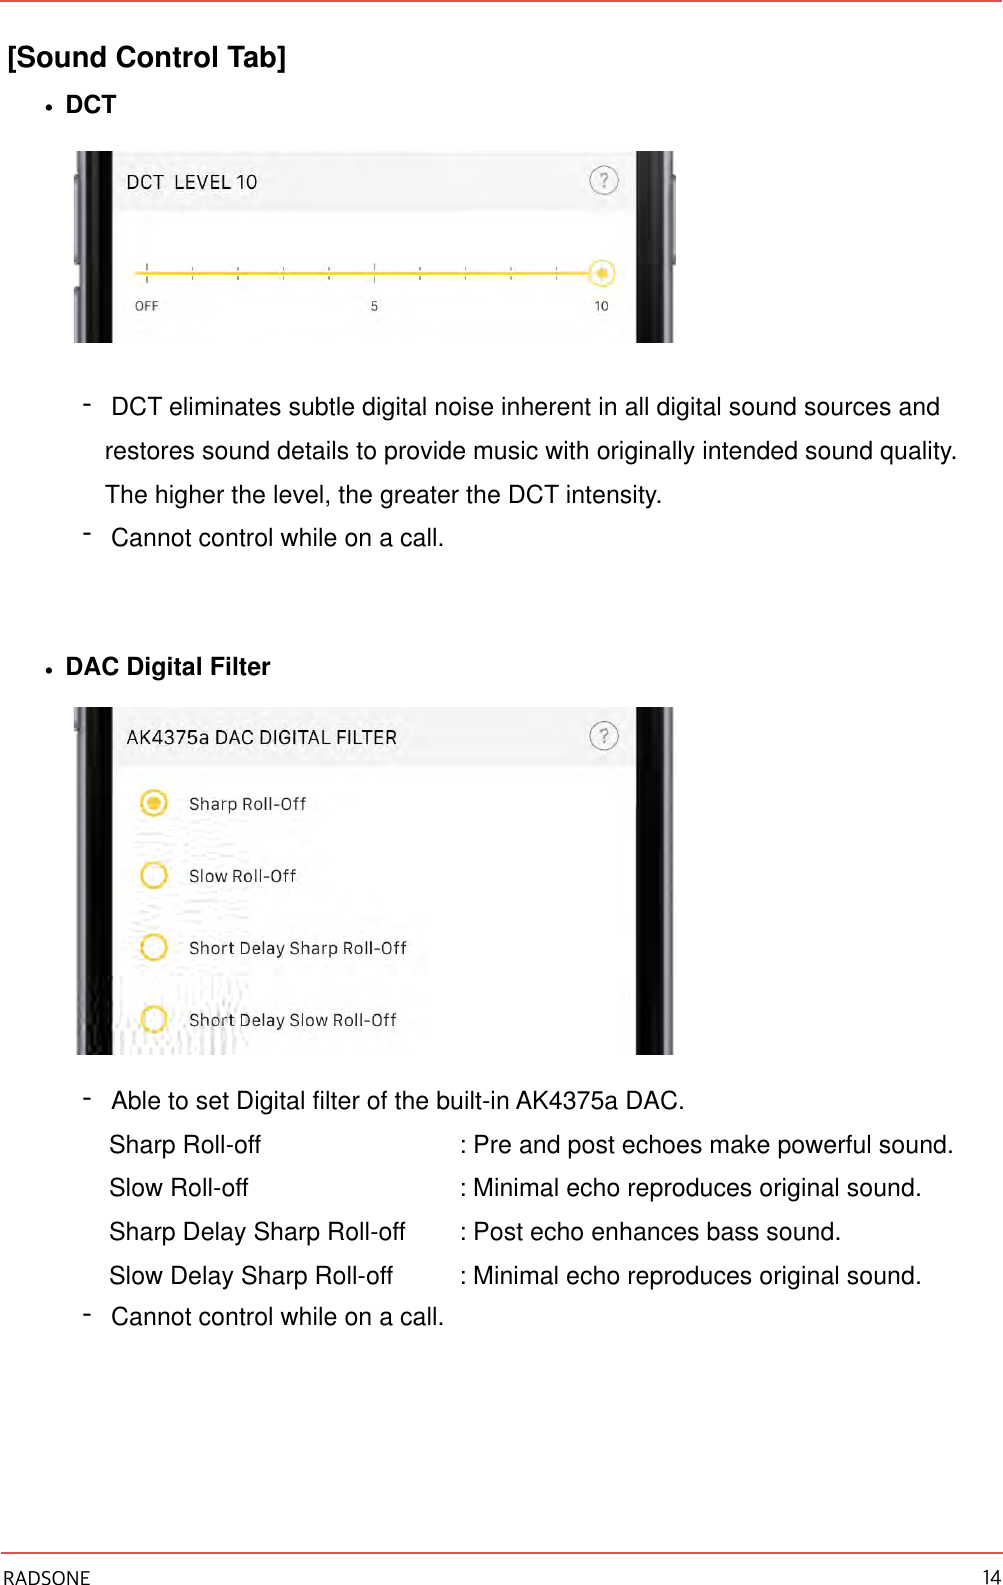 [Sound Control Tab] •DCT -DCT eliminates subtle digital noise inherent in all digital sound sources and restores sound details to provide music with originally intended sound quality. The higher the level, the greater the DCT intensity. -Cannot control while on a call. •DAC Digital Filter -Able to set Digital filter of the built-in AK4375a DAC.  Sharp Roll-off    : Pre and post echoes make powerful sound. Slow Roll-off    : Minimal echo reproduces original sound. Sharp Delay Sharp Roll-off  : Post echo enhances bass sound. Slow Delay Sharp Roll-off  : Minimal echo reproduces original sound. -Cannot control while on a call. RADSONE 14